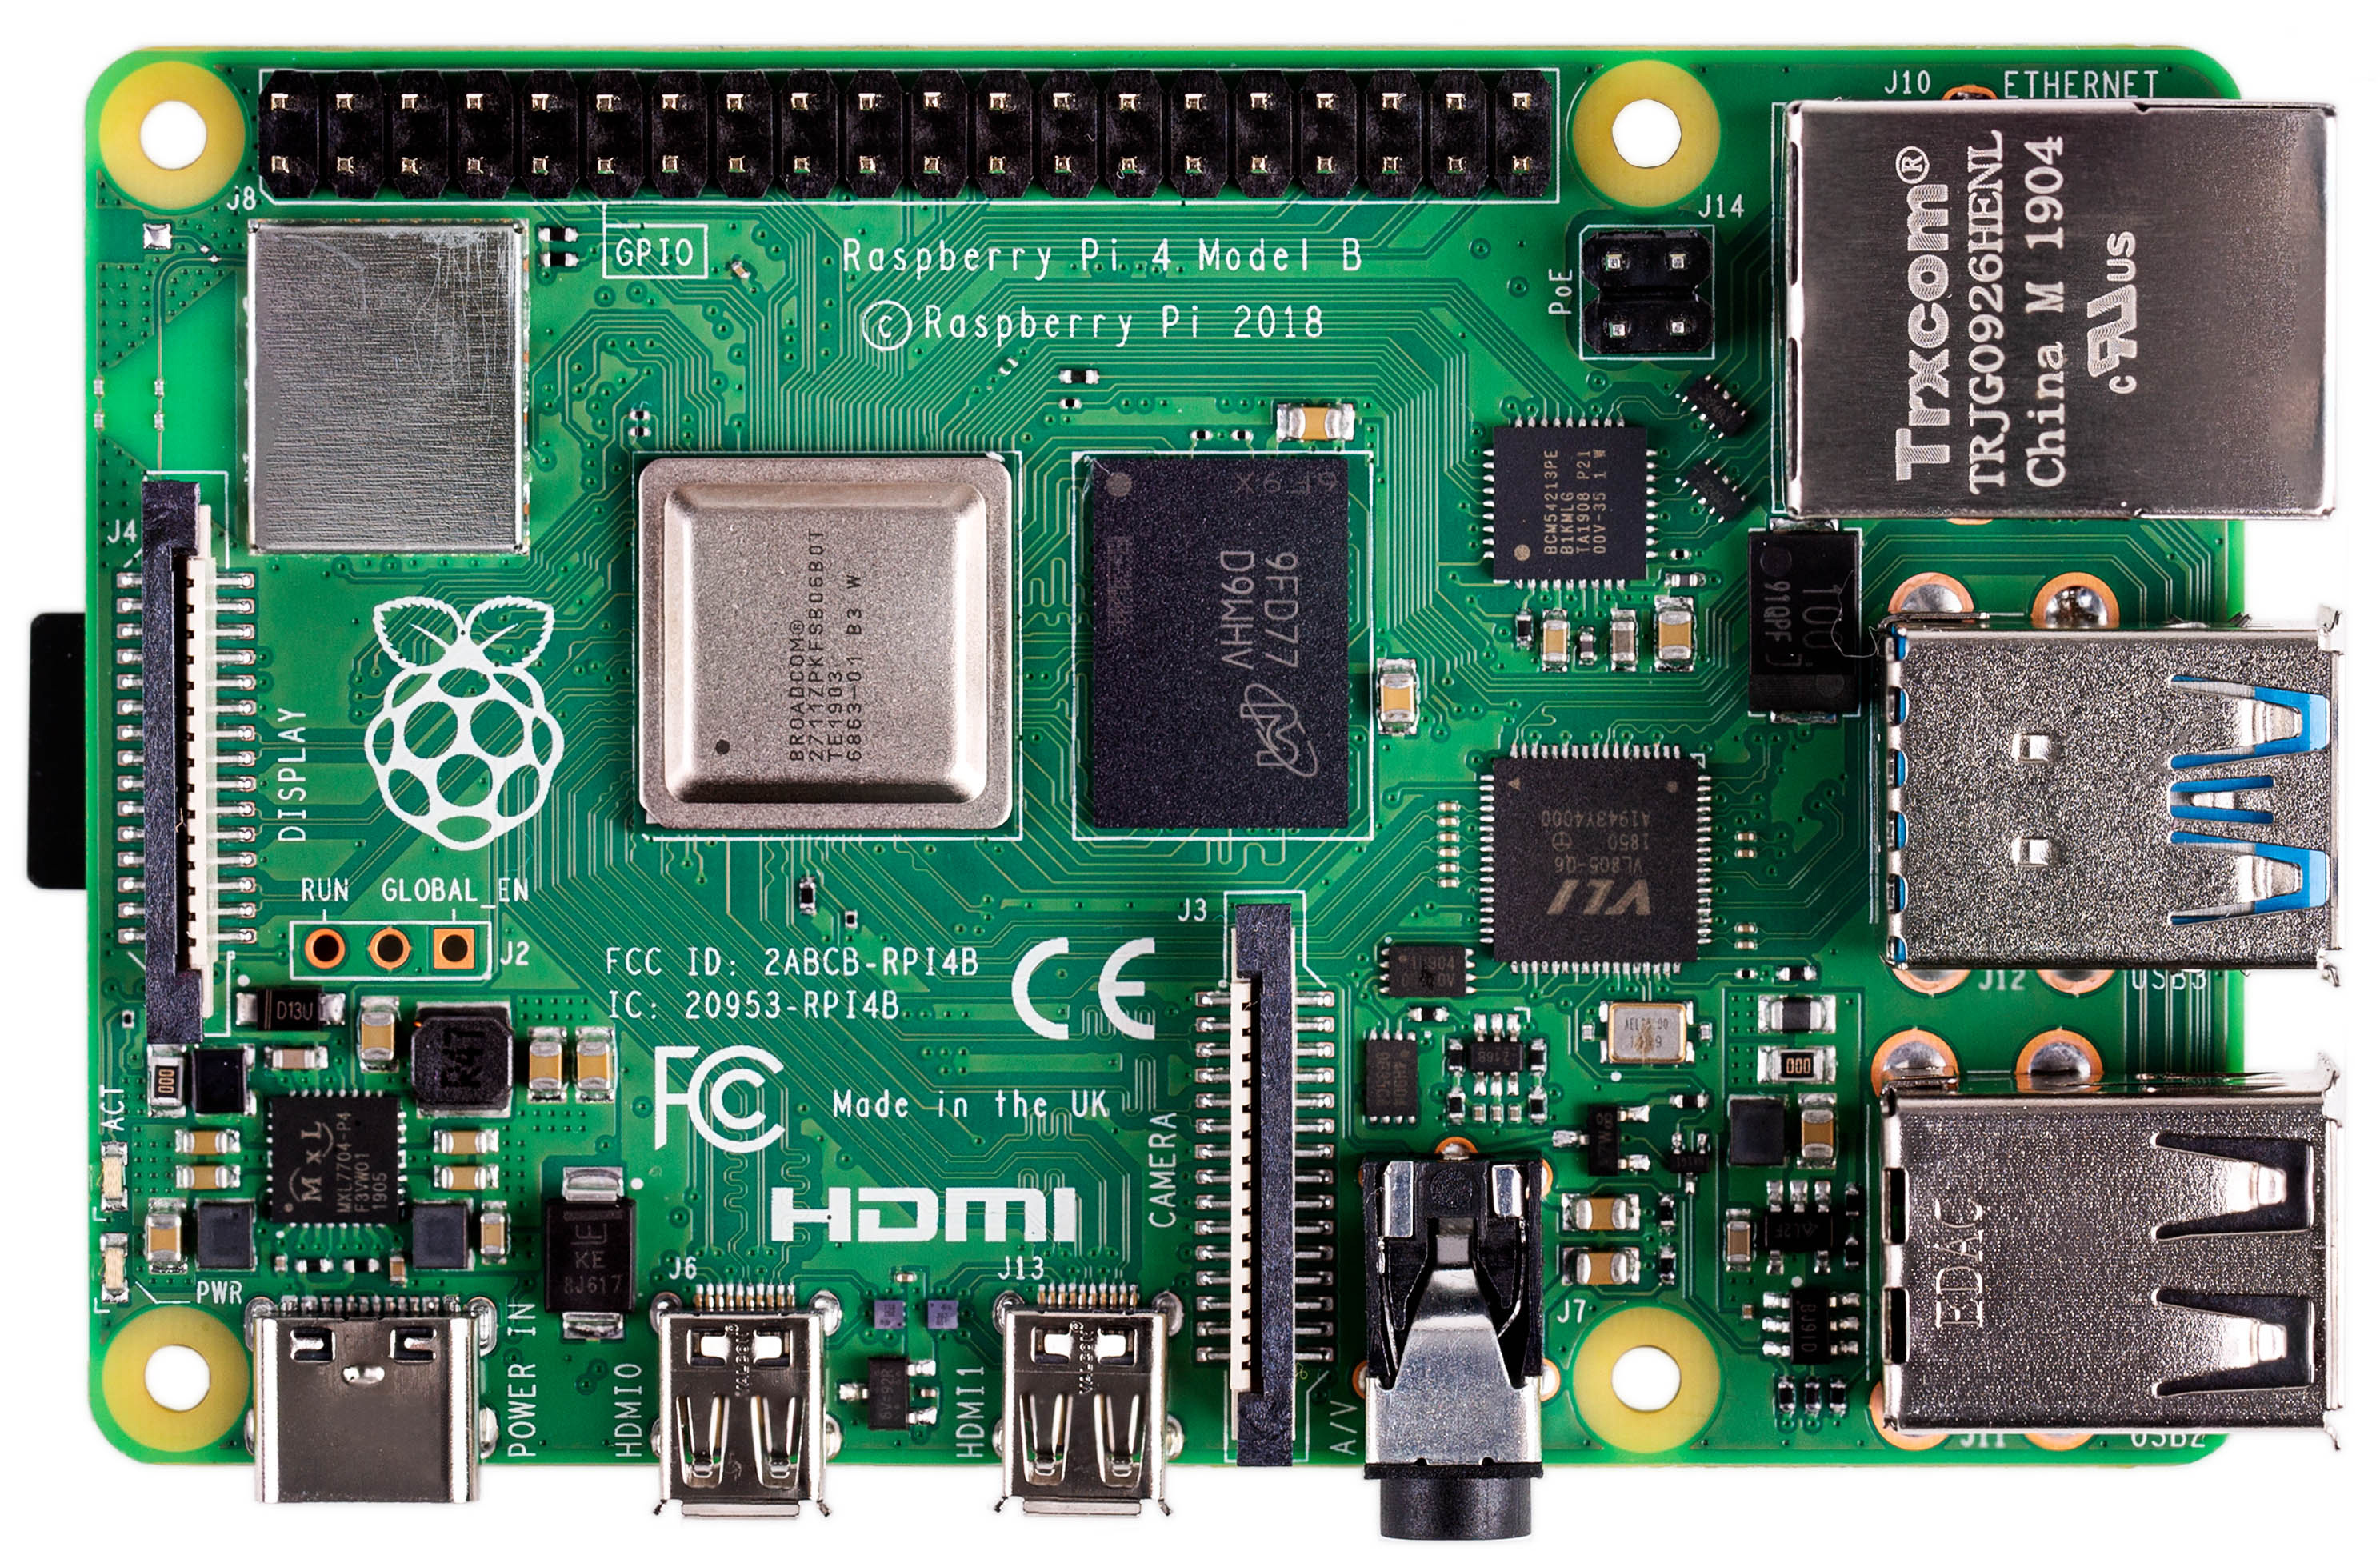 New Raspberry Pi 4 model comes with a ton of RAM: 8GB | Ars Technica